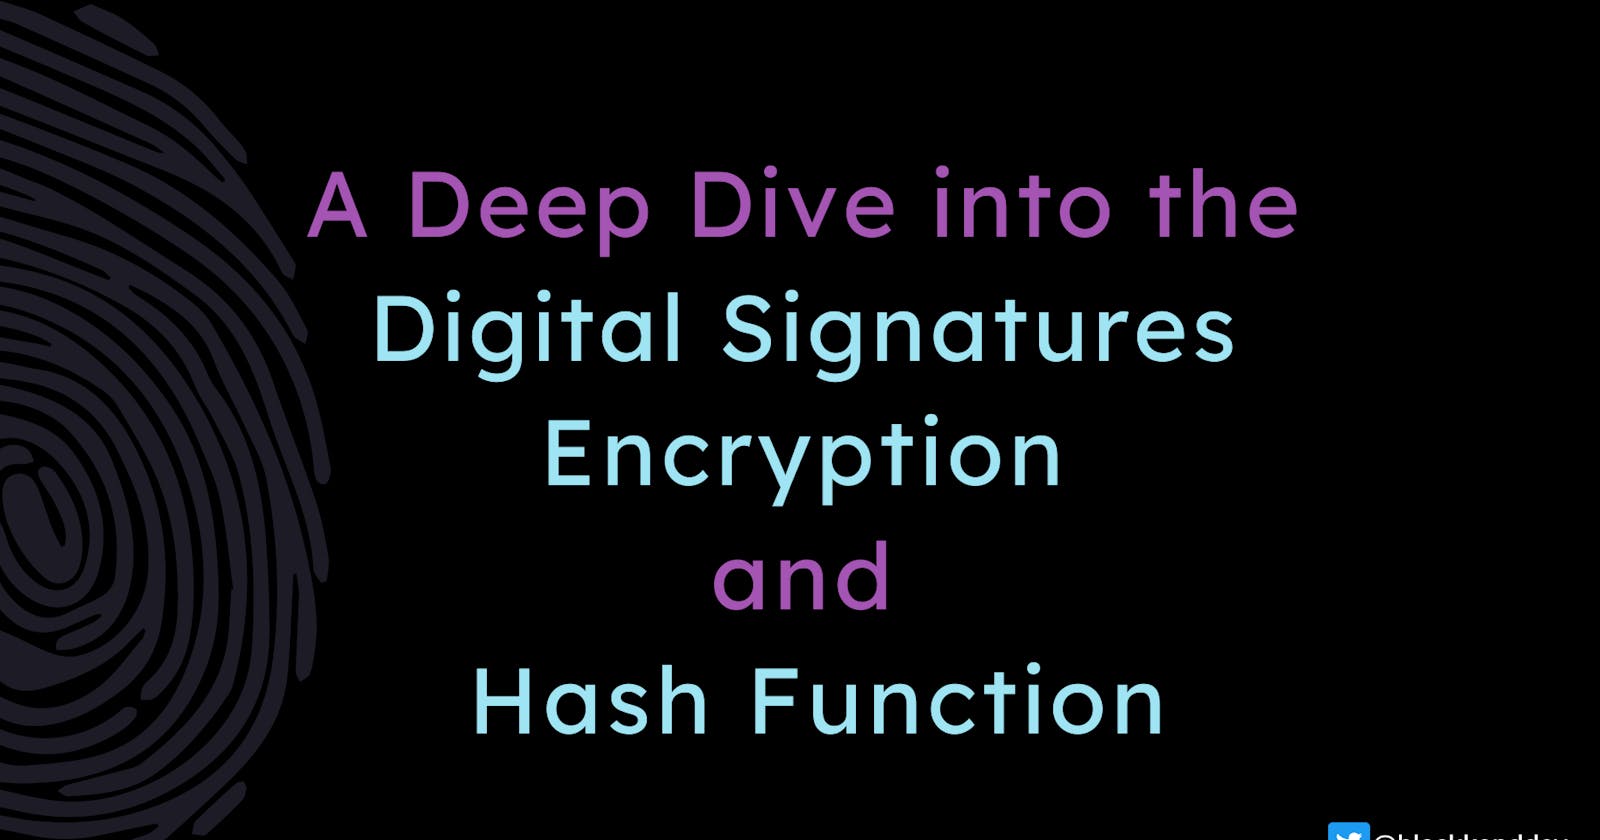 A Deep Dive into the Digital Signatures, Encryption, and Hash Function